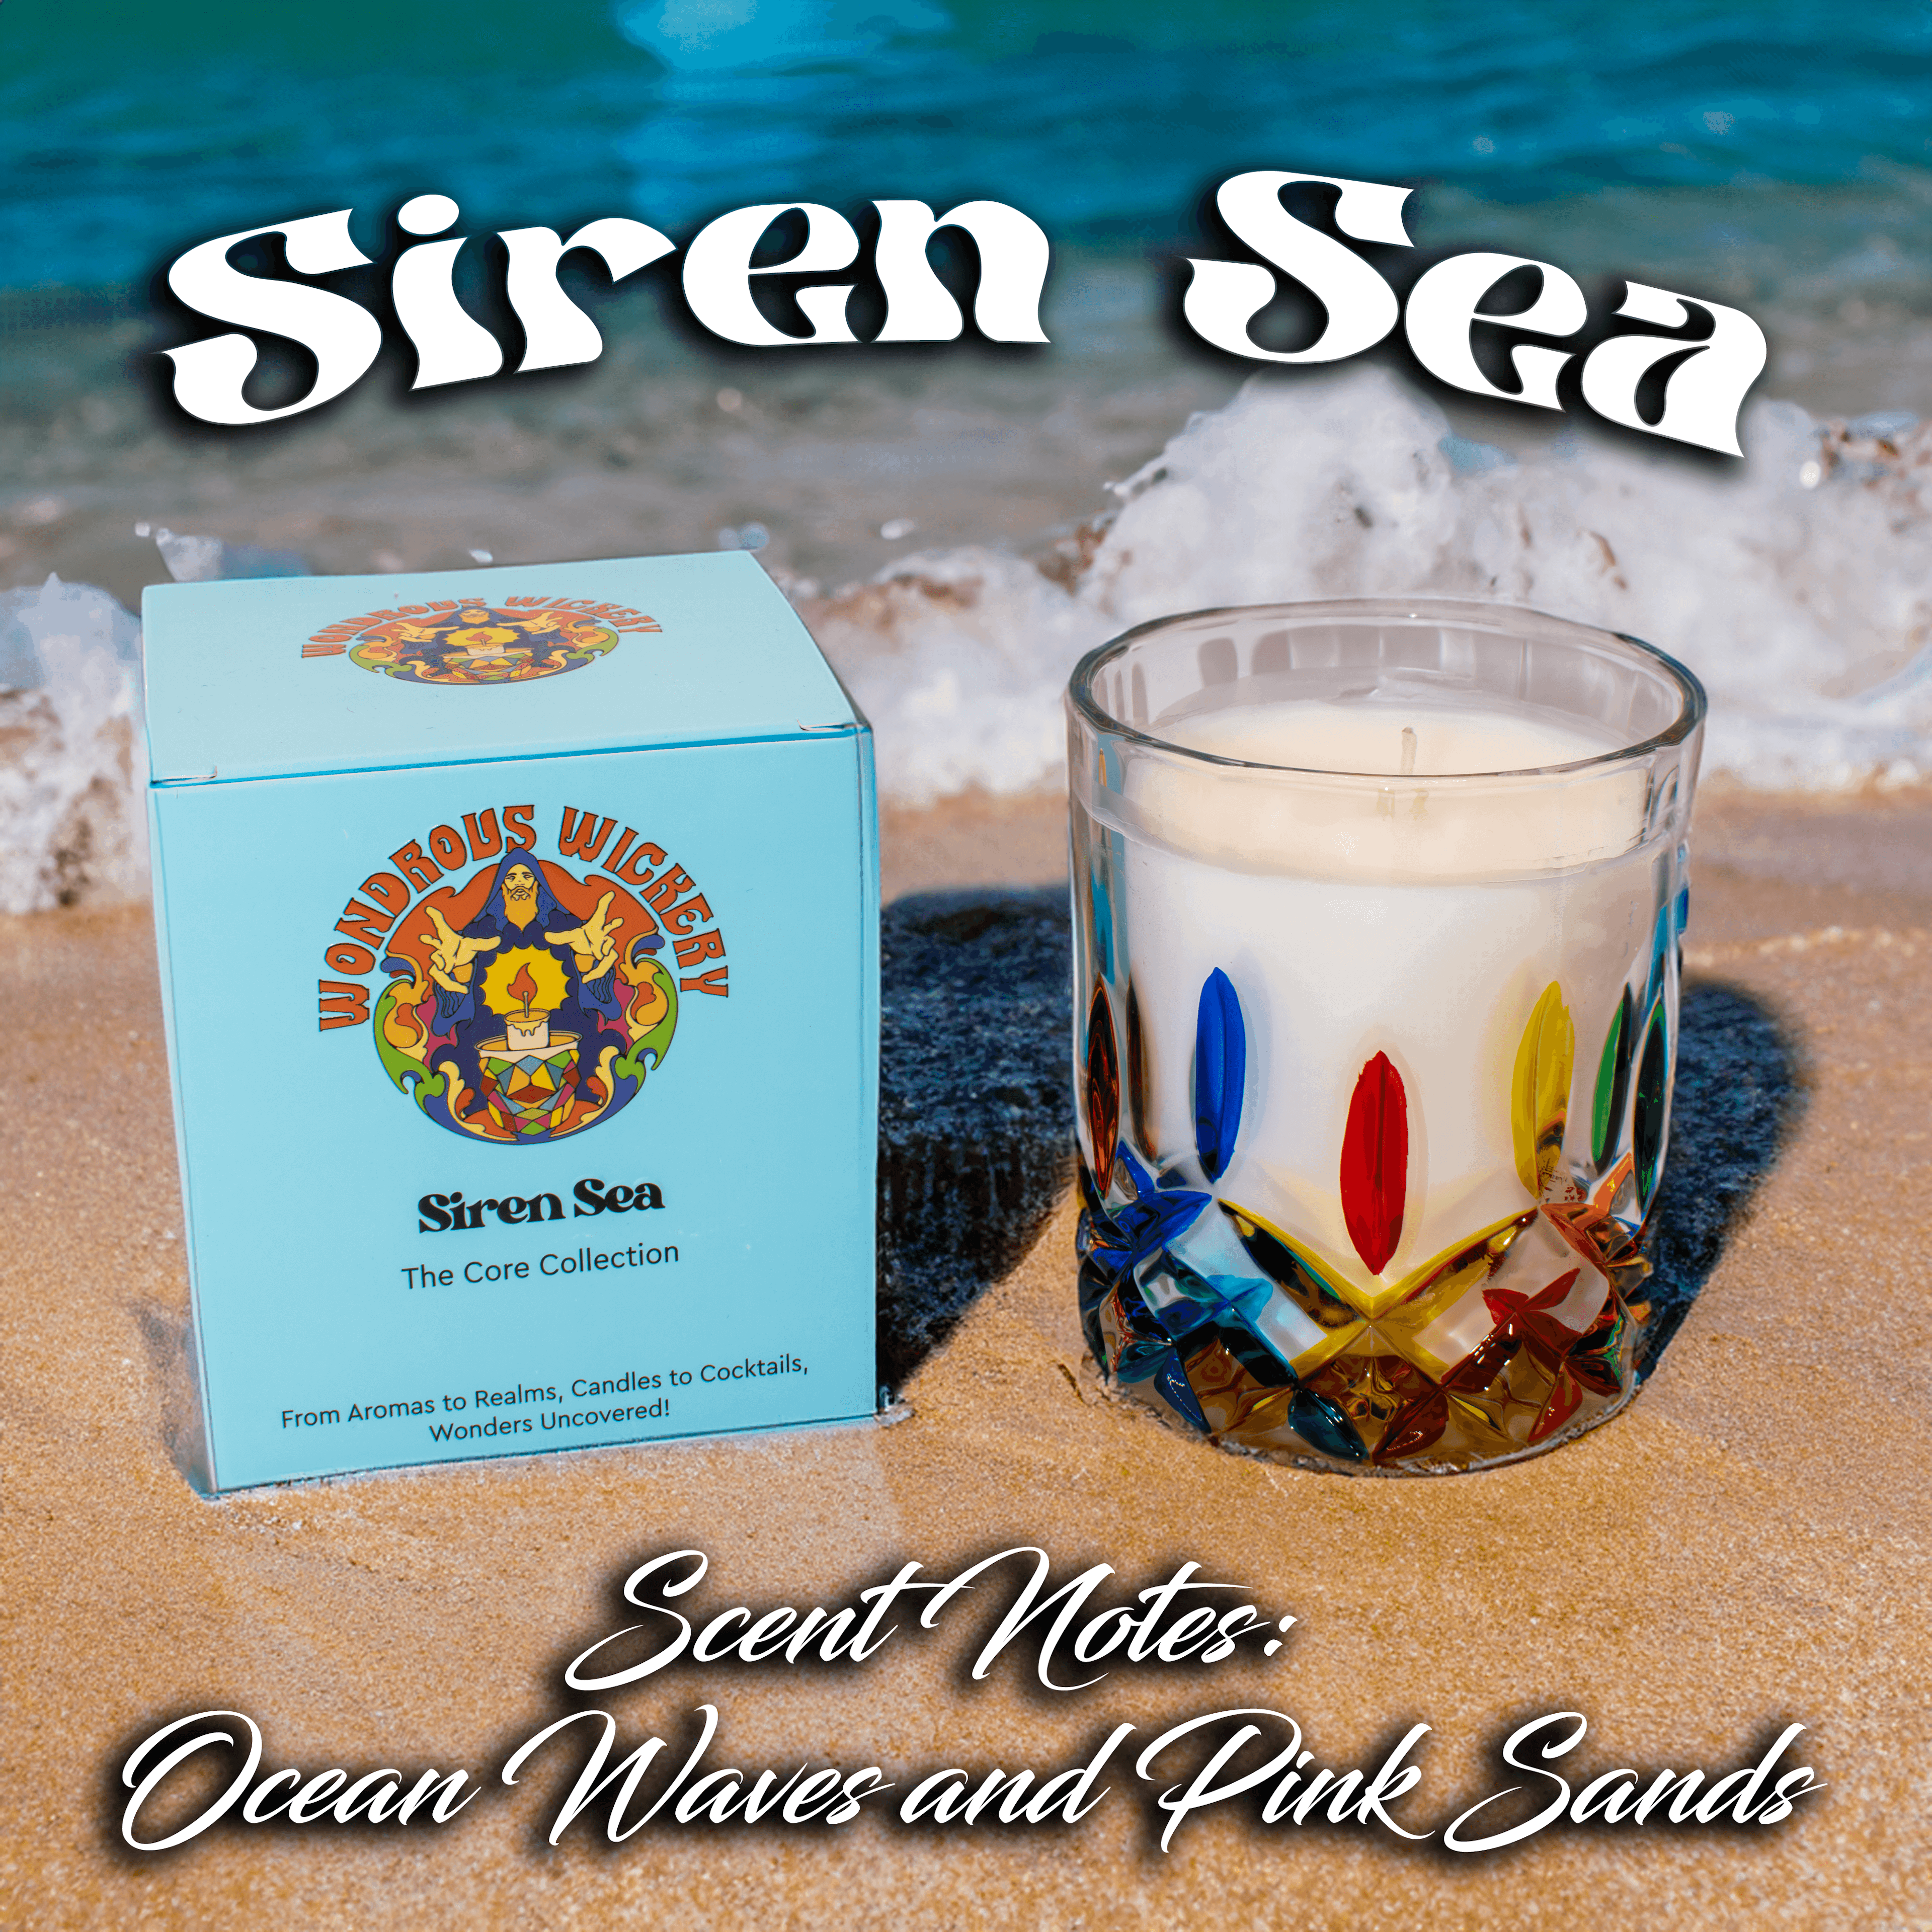 Siren Sea Candle / Candle to Cocktail Experience / Core Collection / Hand Crafted / Unique Candle Gift - undefined - Wondrous Wickery